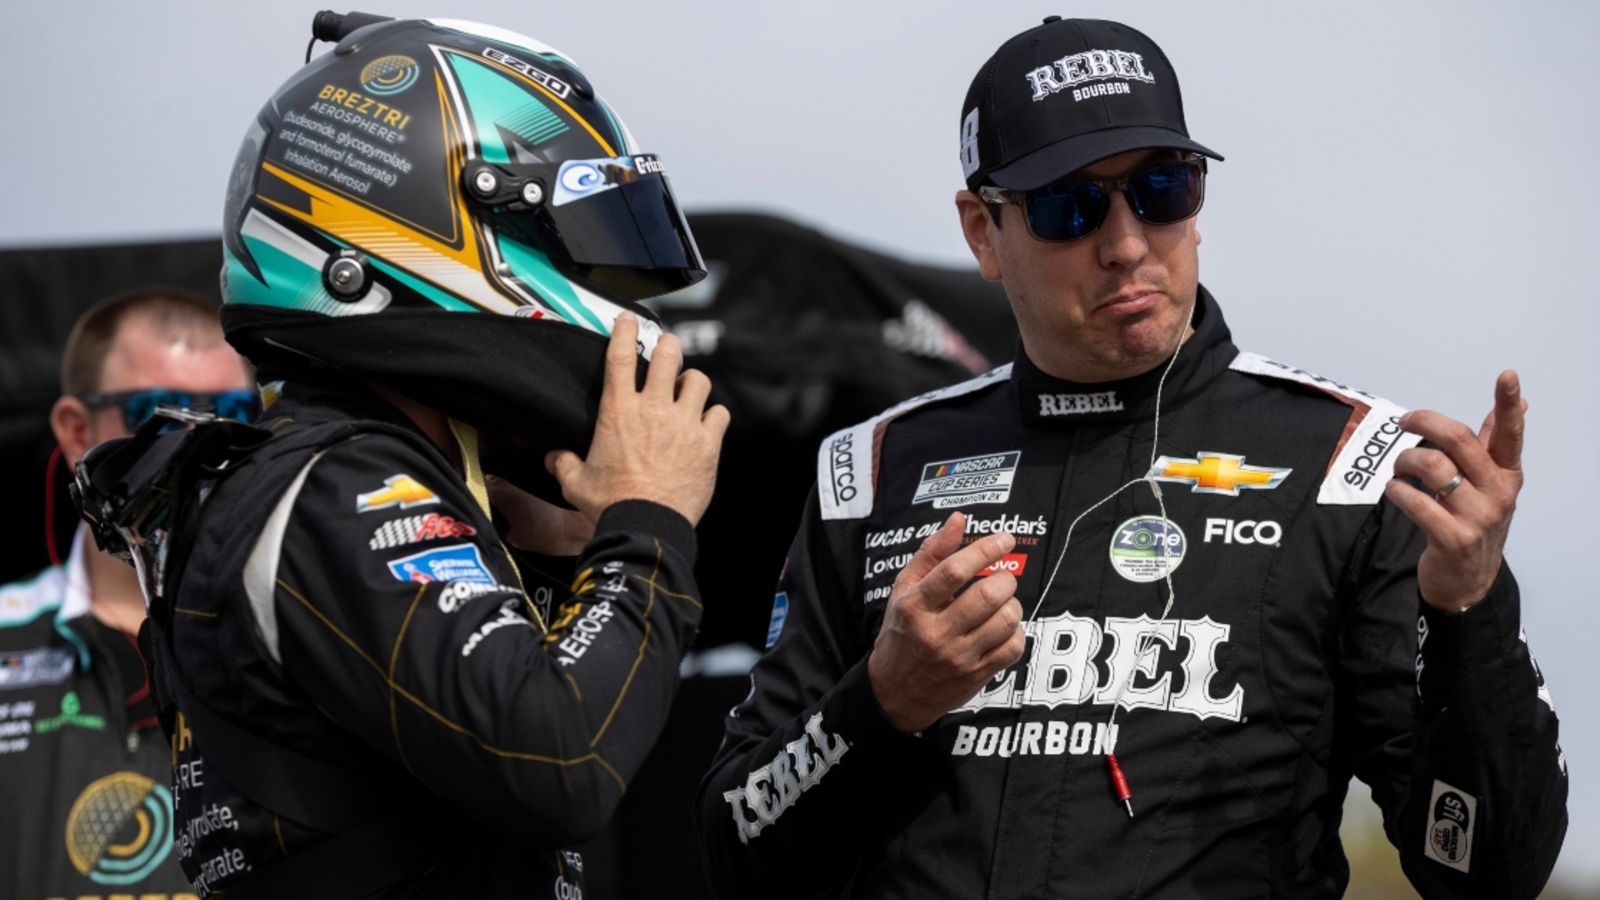 Richard Childress Racing steadies the ship and leaves Texas with pair of top-10 finishes